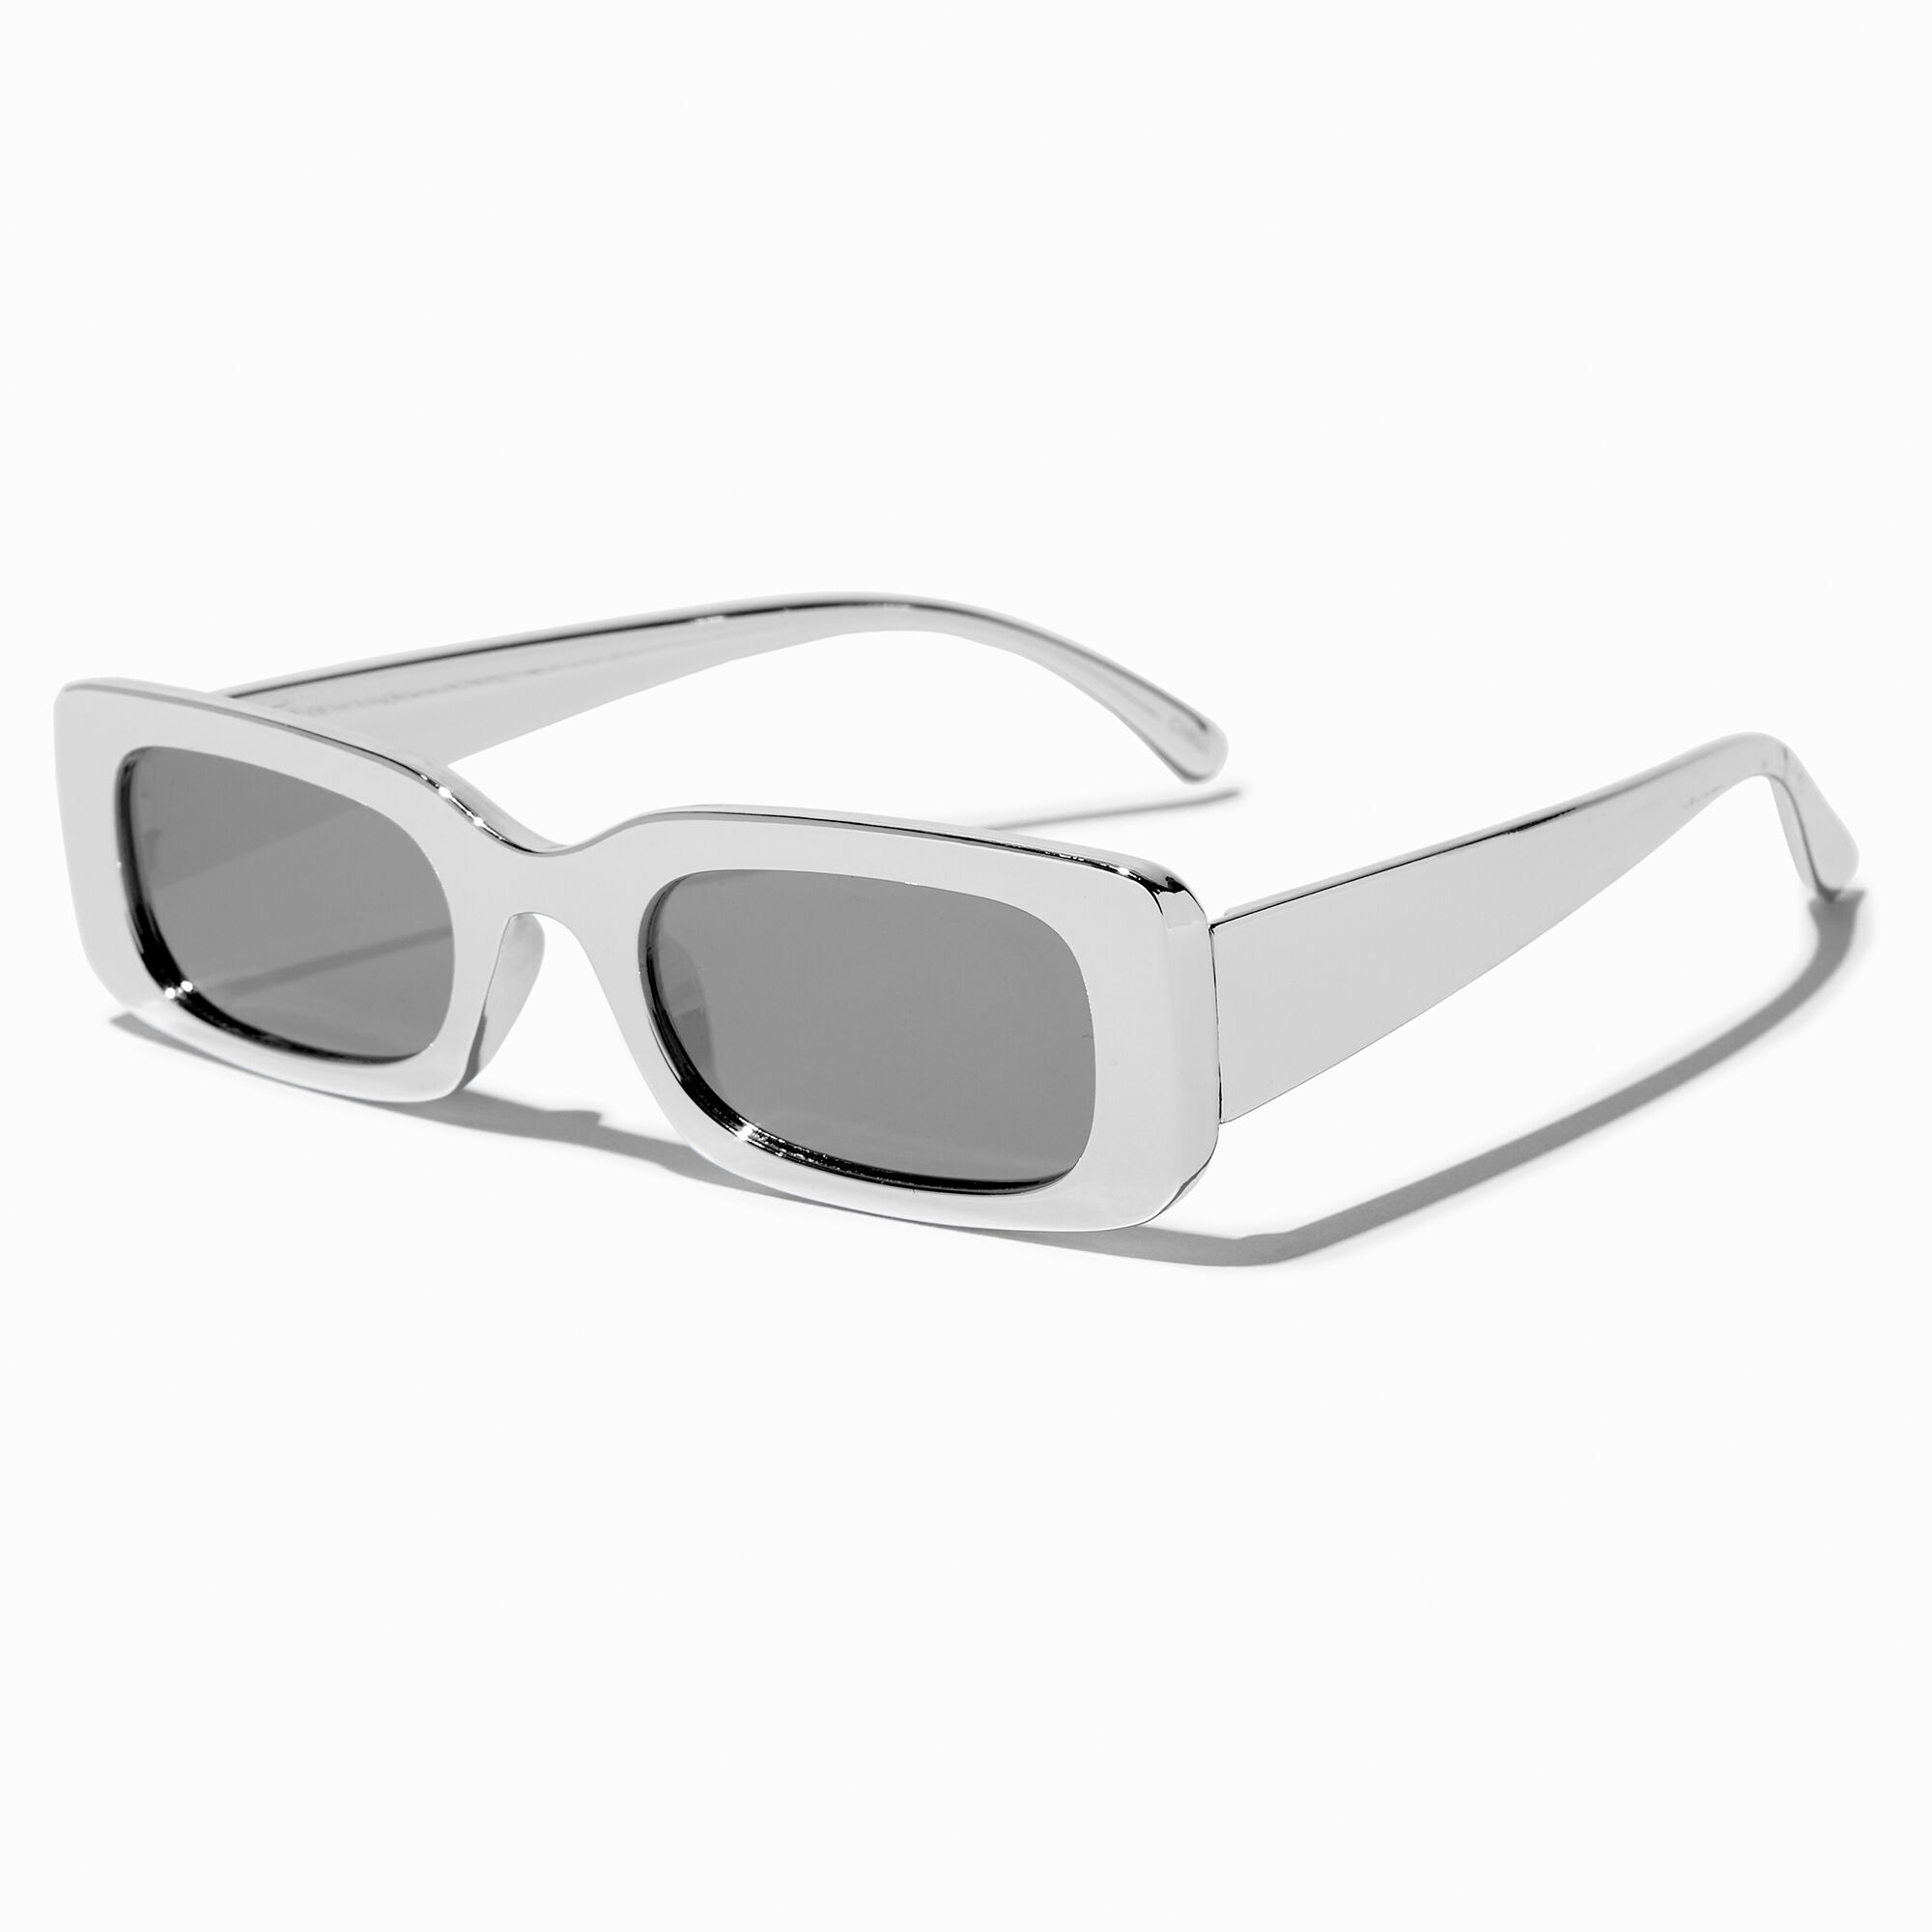 View Claires Metallic Chunky Rectangular Sunglasses Silver information